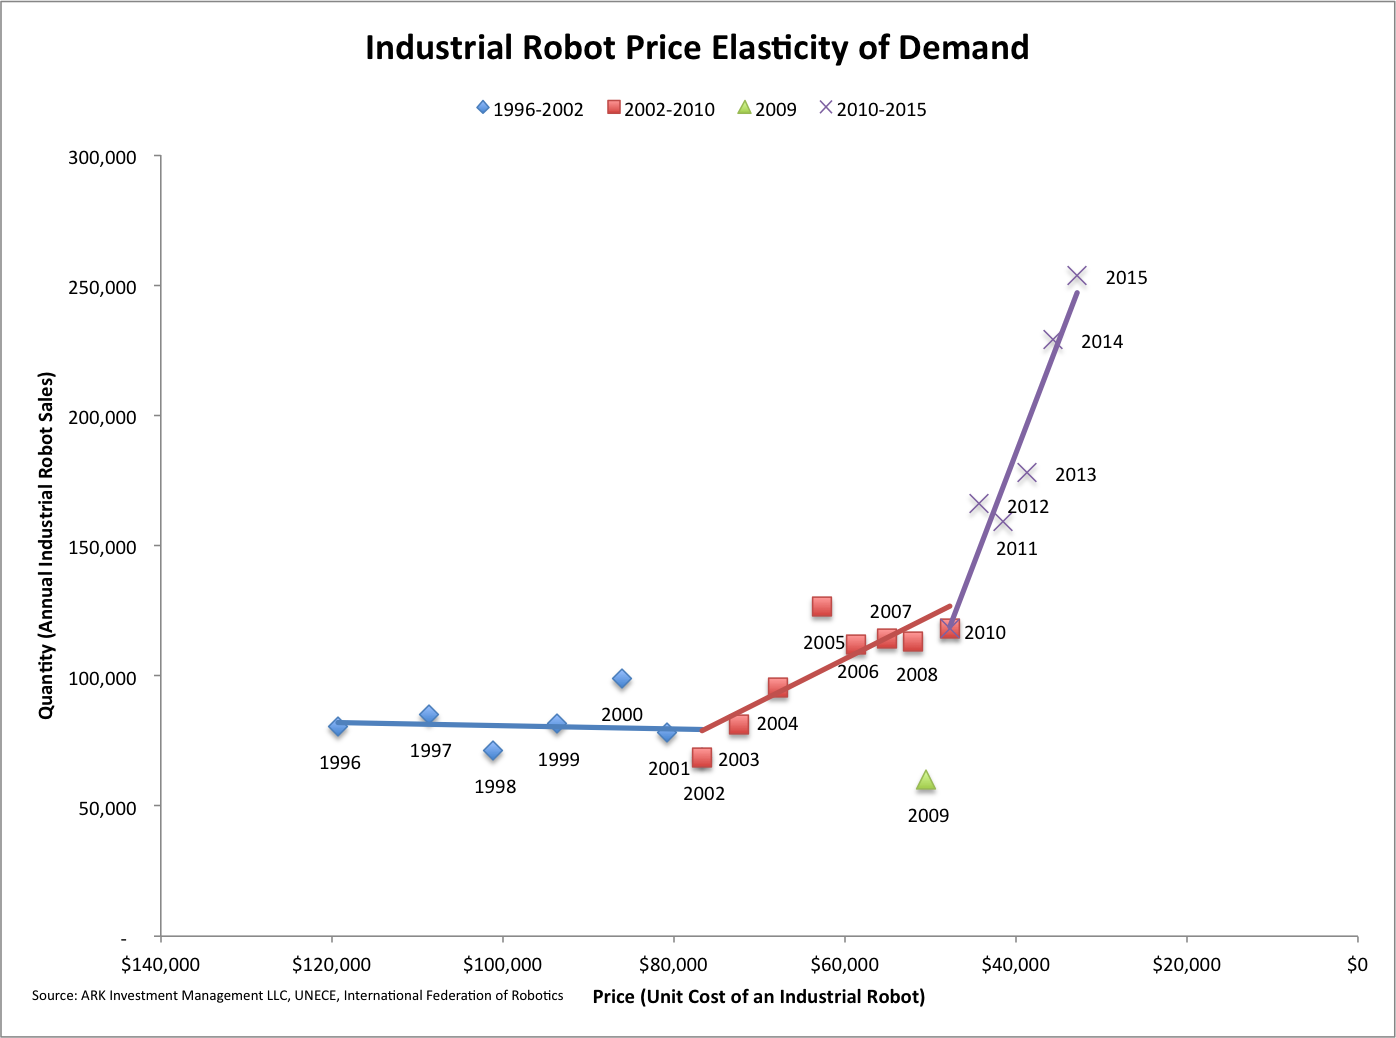 Sam Korus on Twitter: "@Robohub Given cost declines for industrial &amp; increasing price elasticity of demand it seems their industrial robot estimate is conservative https://t.co/ktQ8tU6GRe" / Twitter